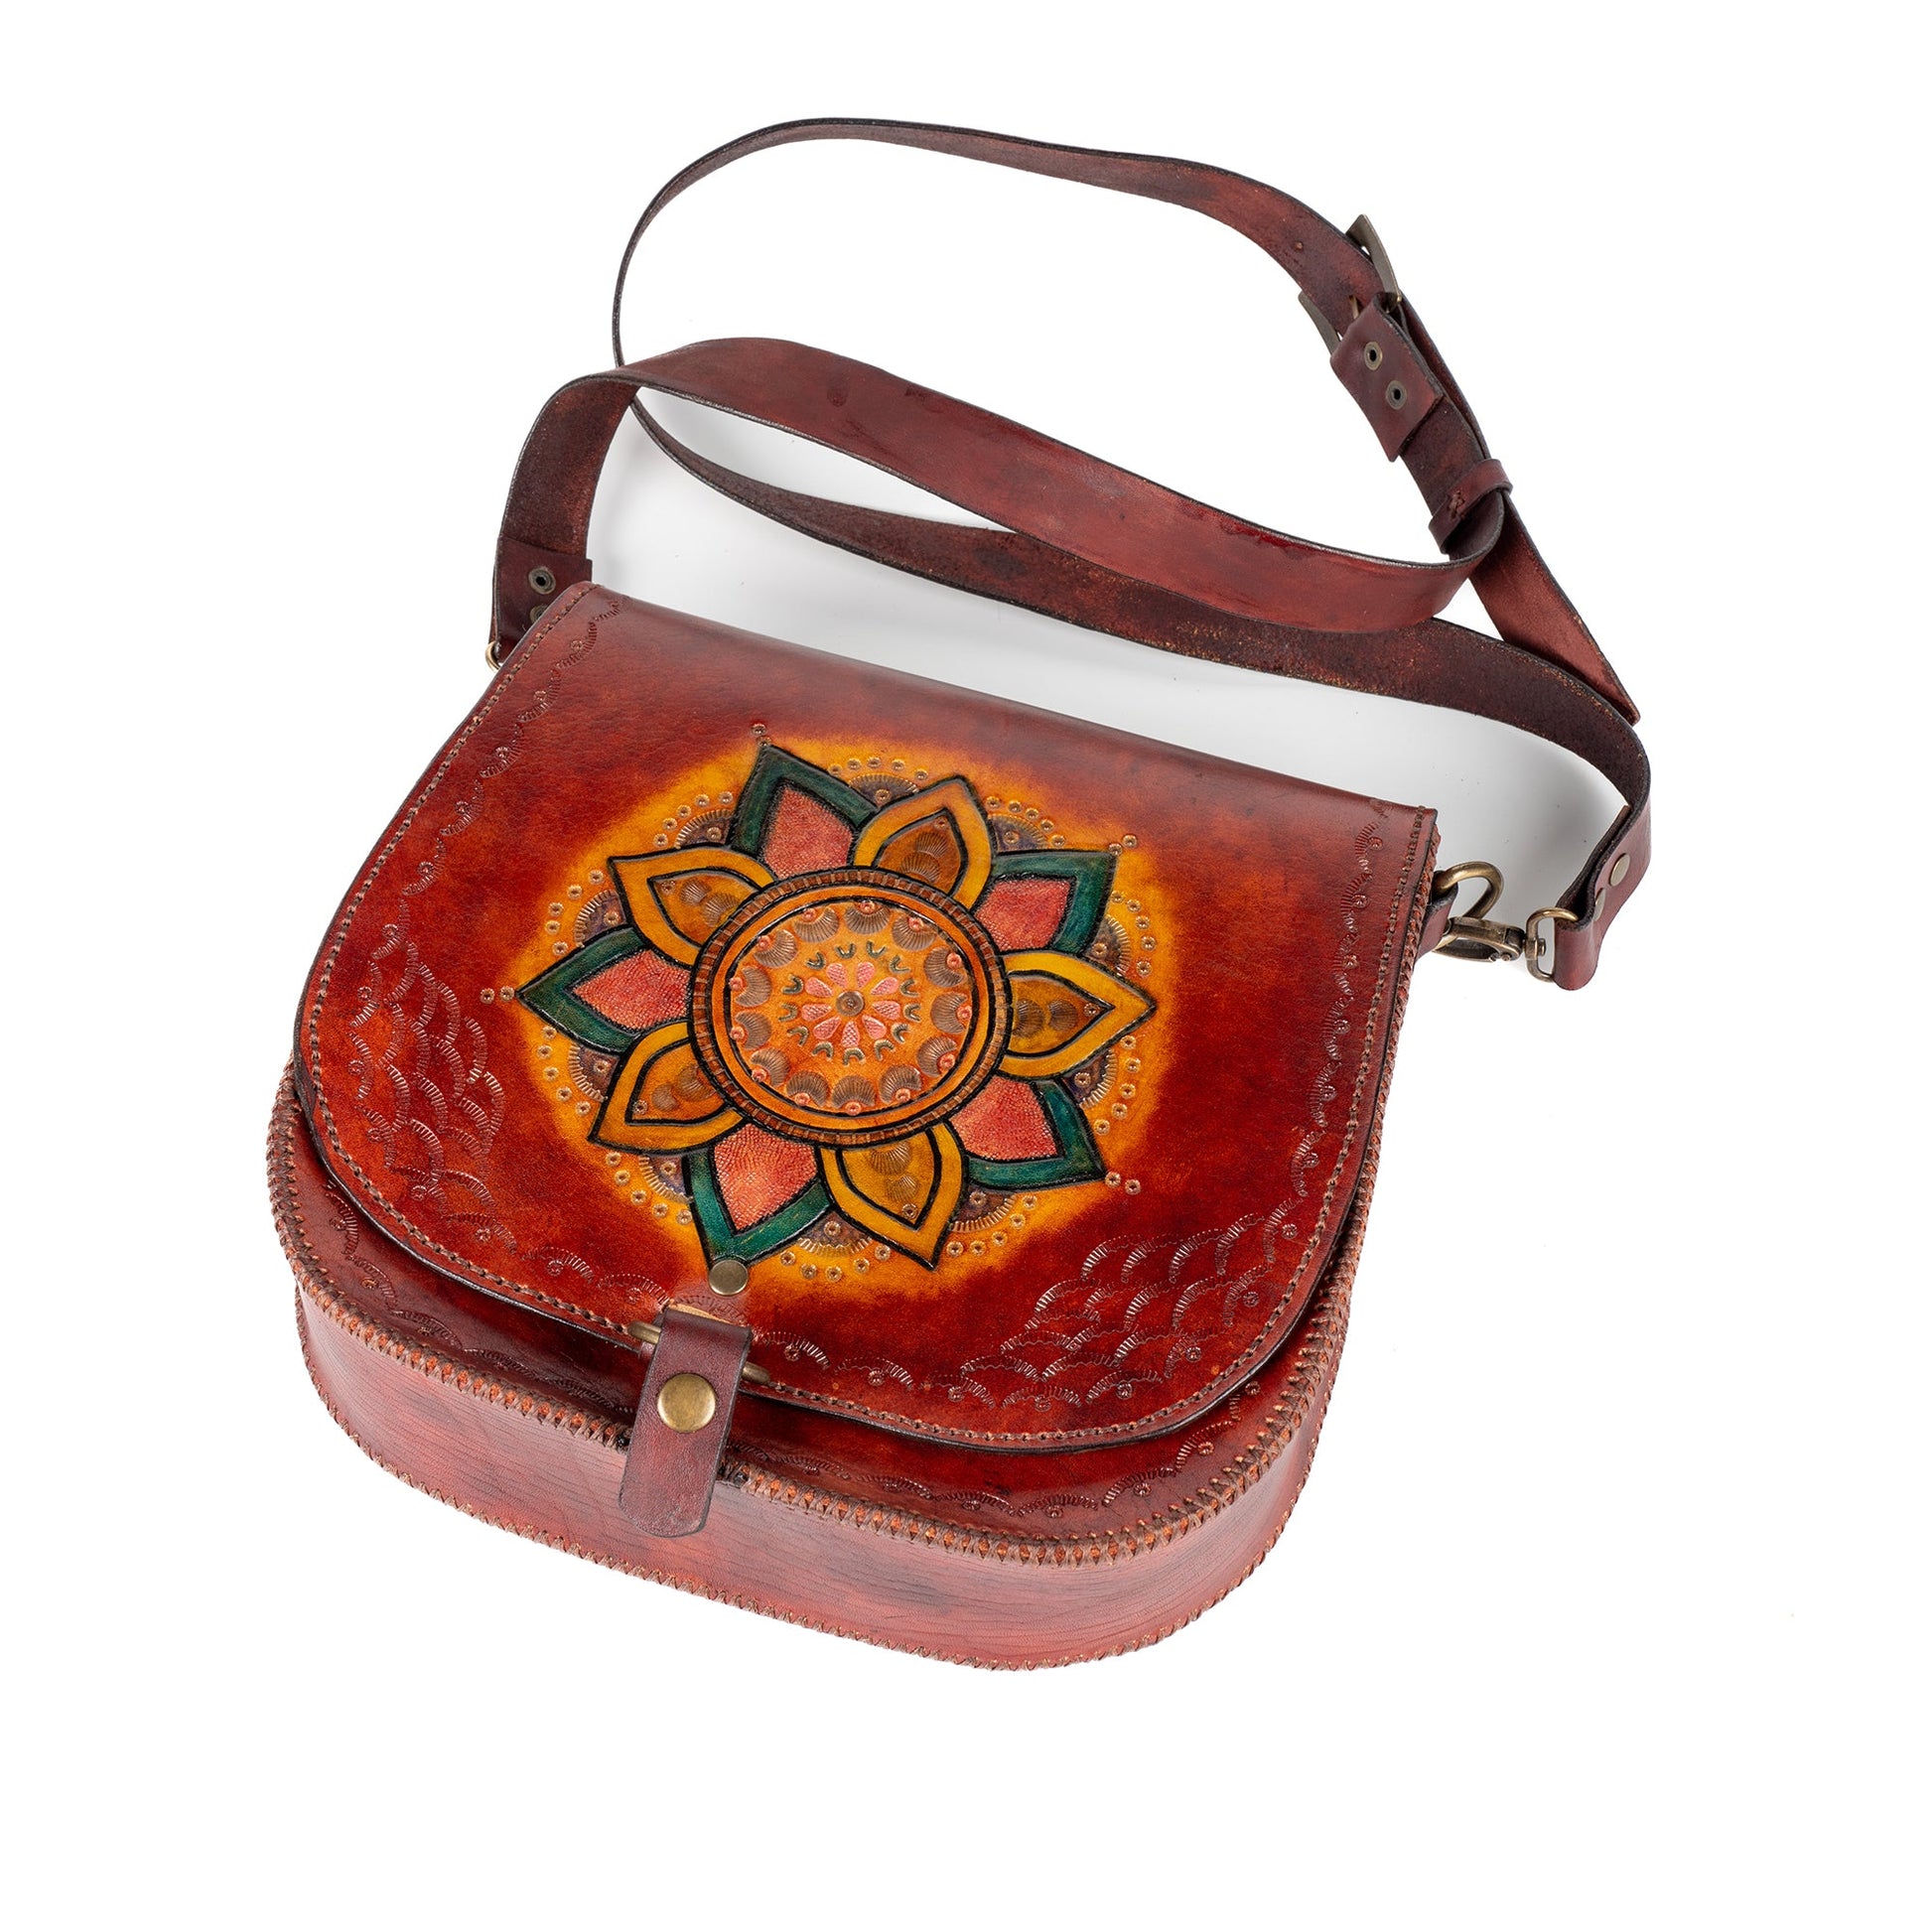 Amisos Leather Carved & Crafted Hand Bag - Handbags Zengoda Shop online from Artisan Brands